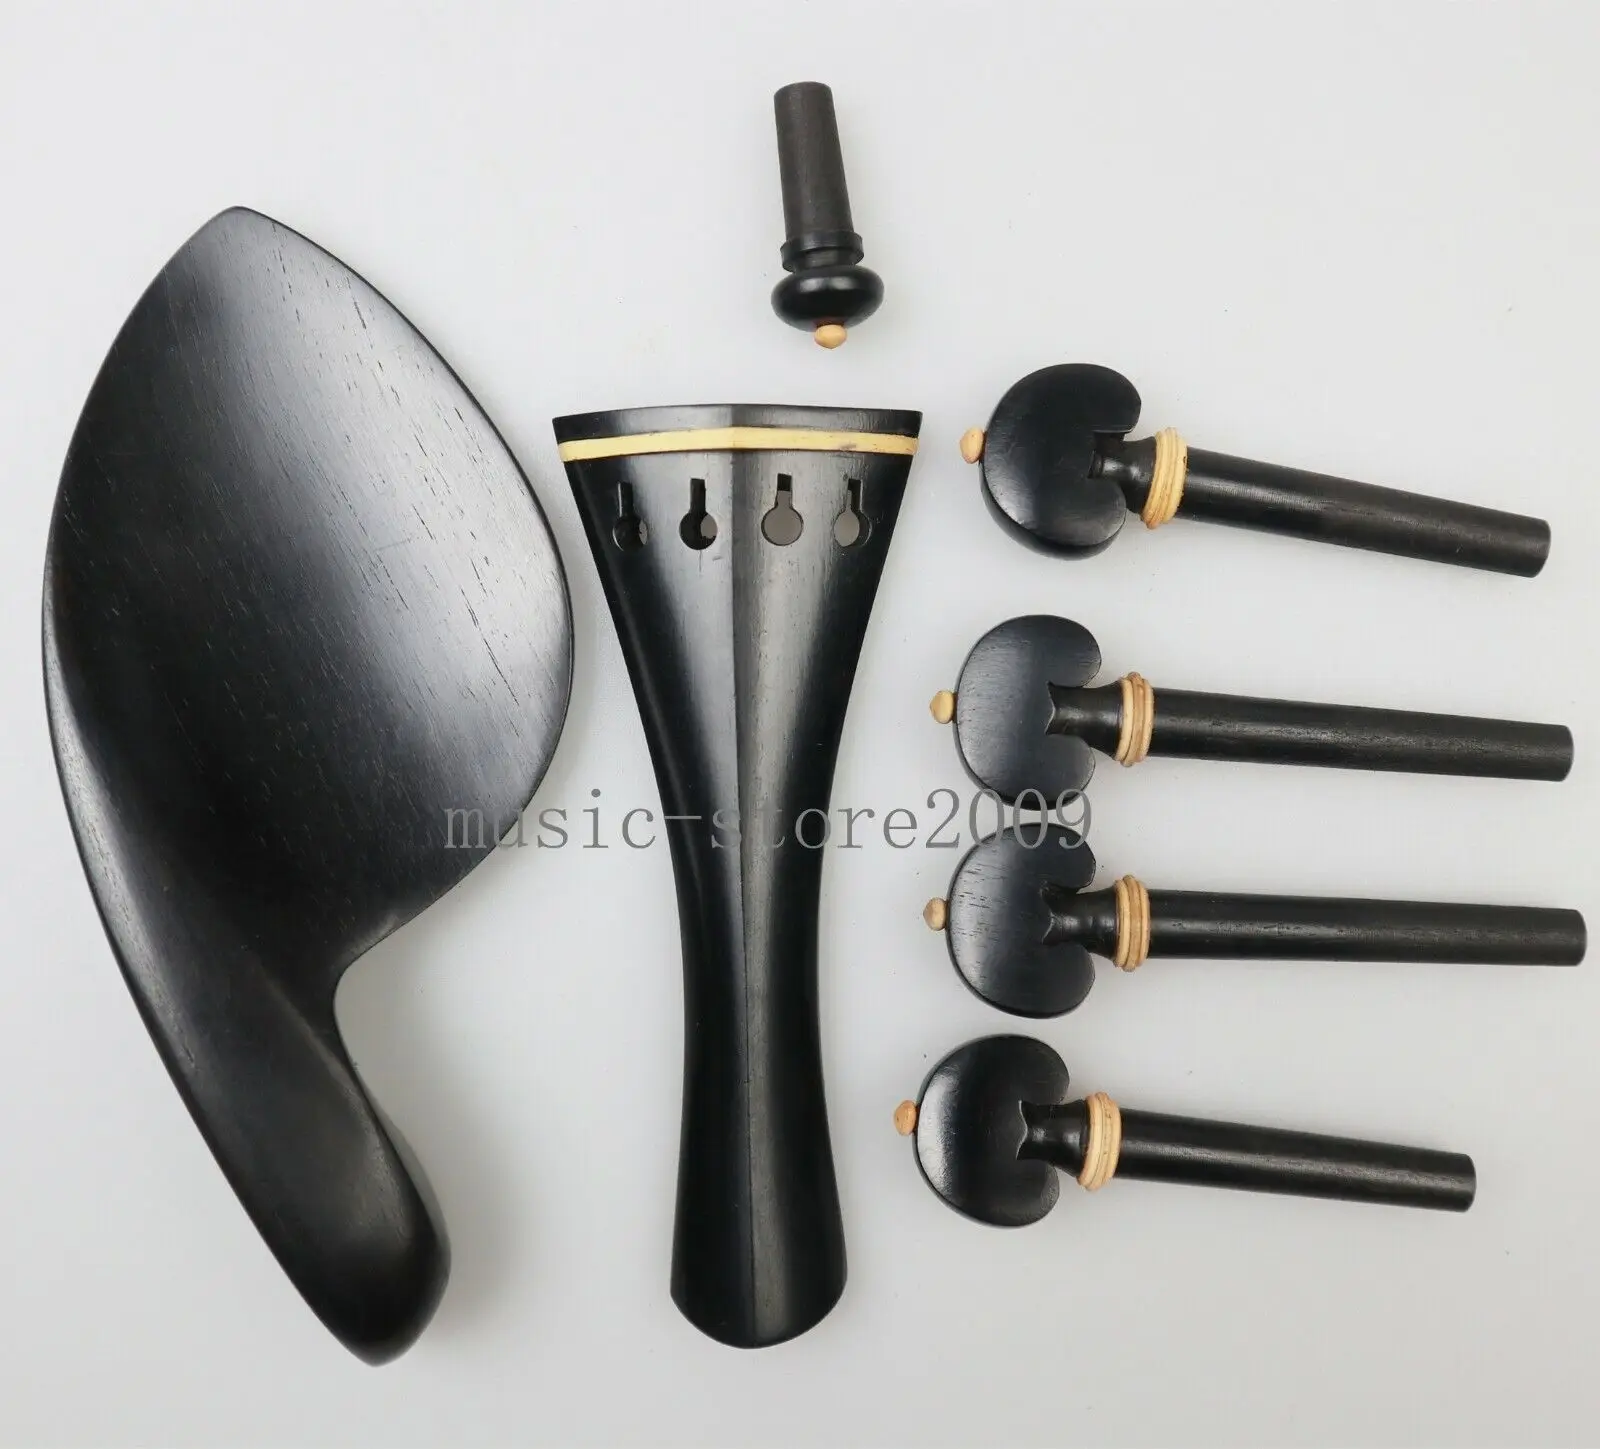 Ebony Wood Viola Parts Accessories Fitting Pegs Chinrest Tailpiece Endpin enlarge